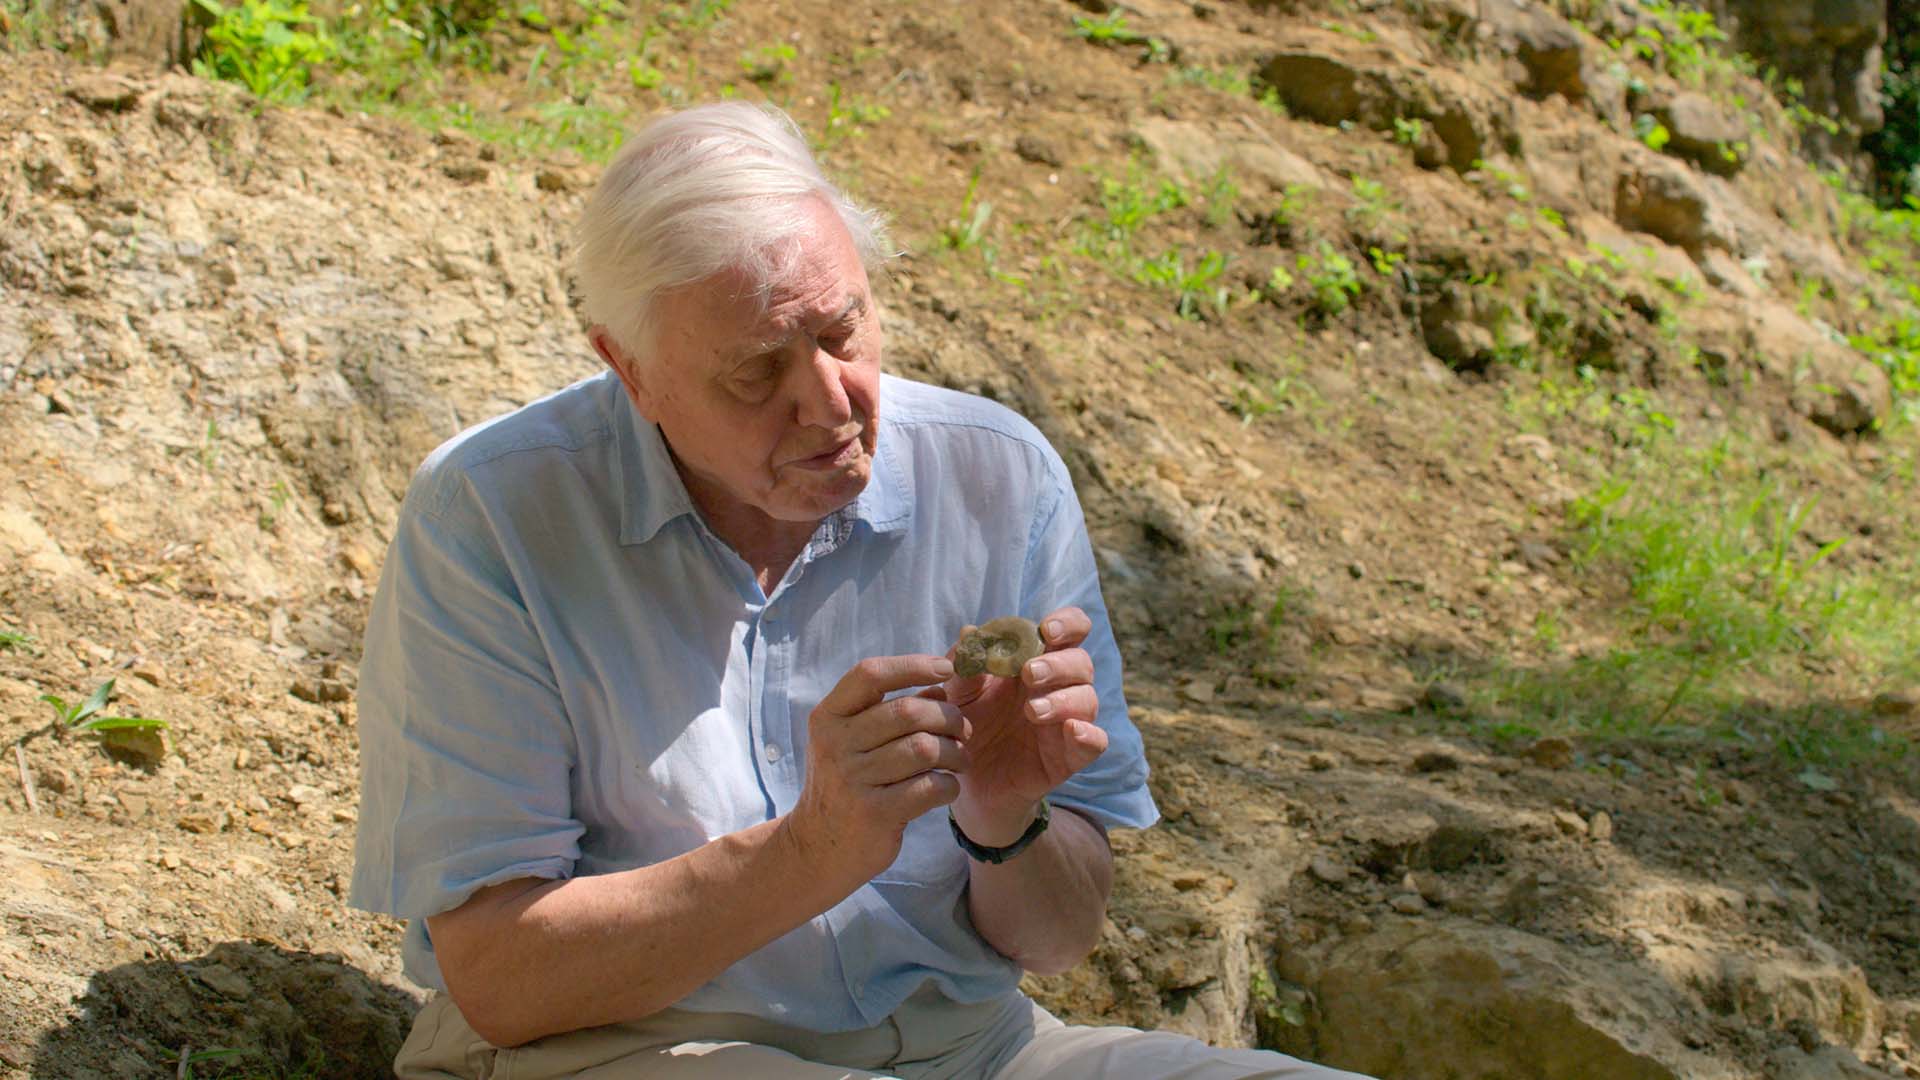 David Attenborough's New Nature Documentary 'A Life On Our Planet' Is Coming to Your Streaming Queue